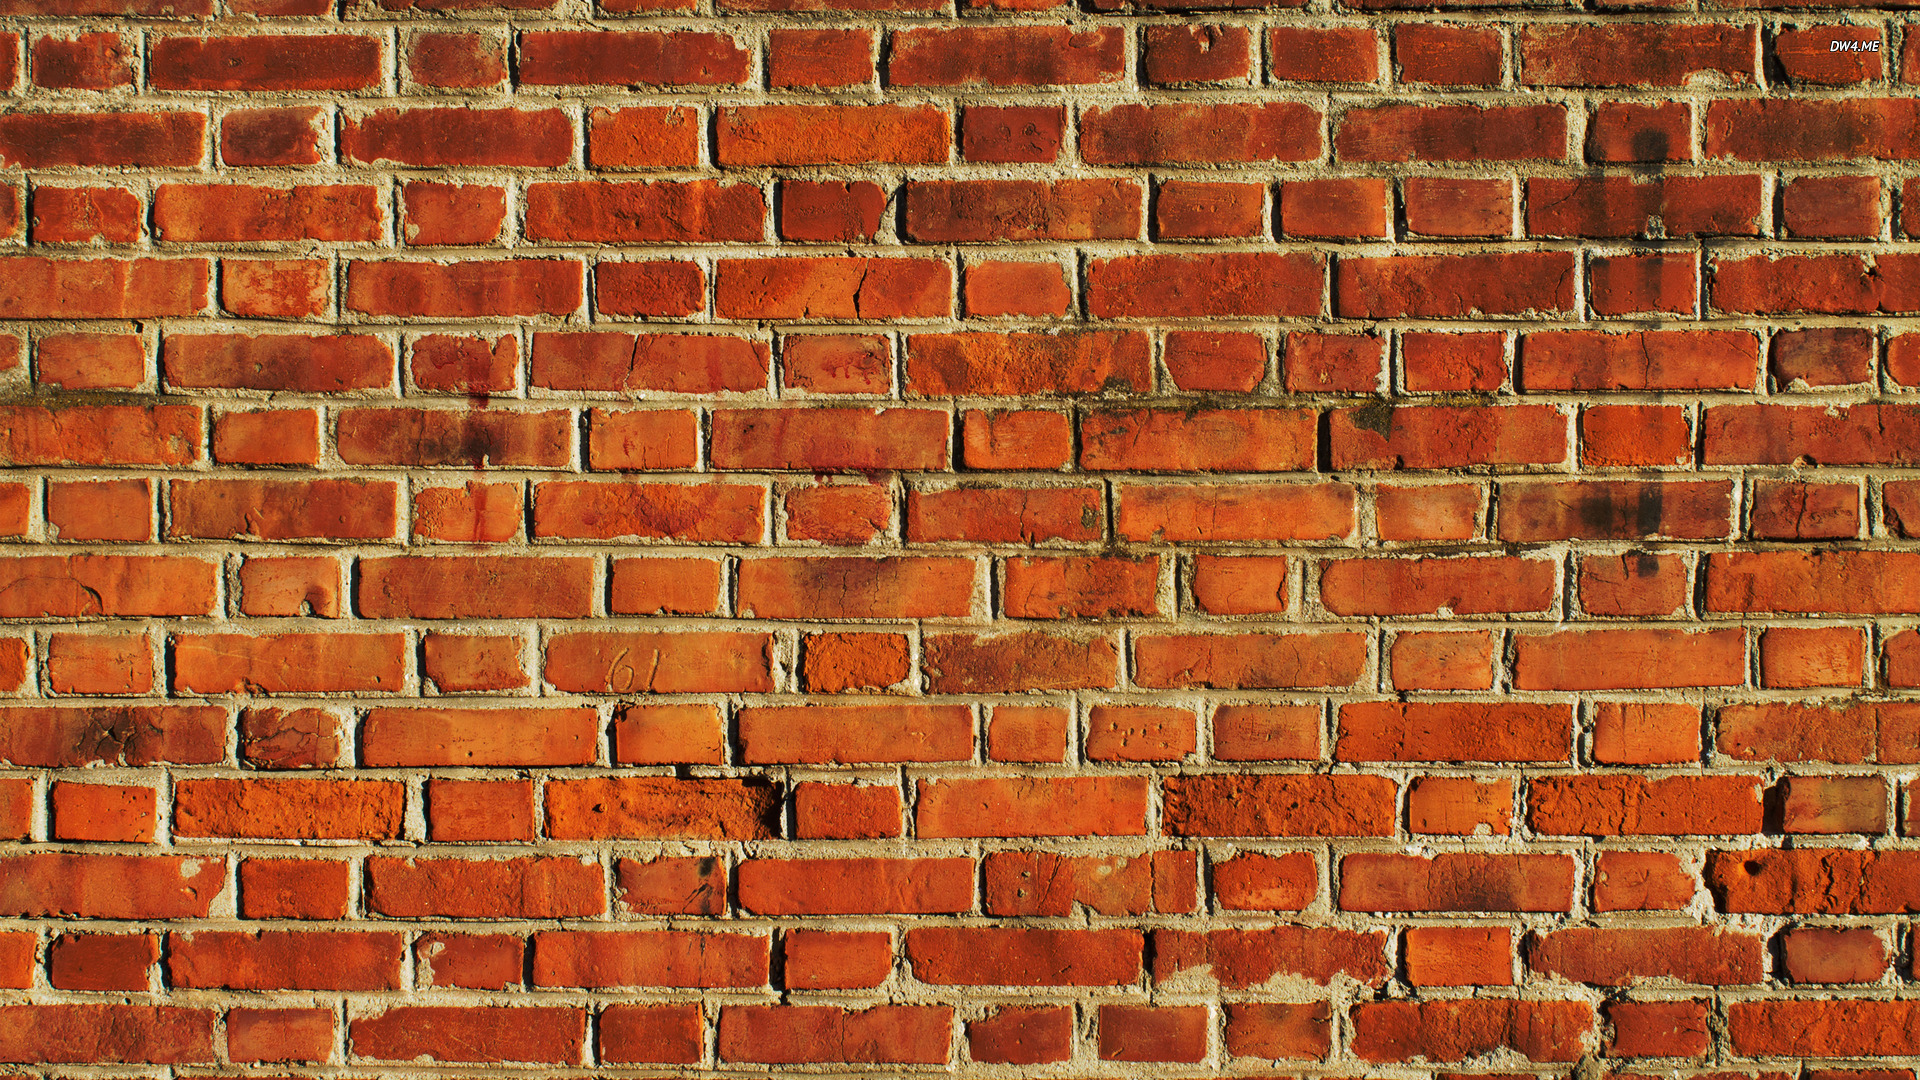 Bricks Wallpapers Group with 49 items